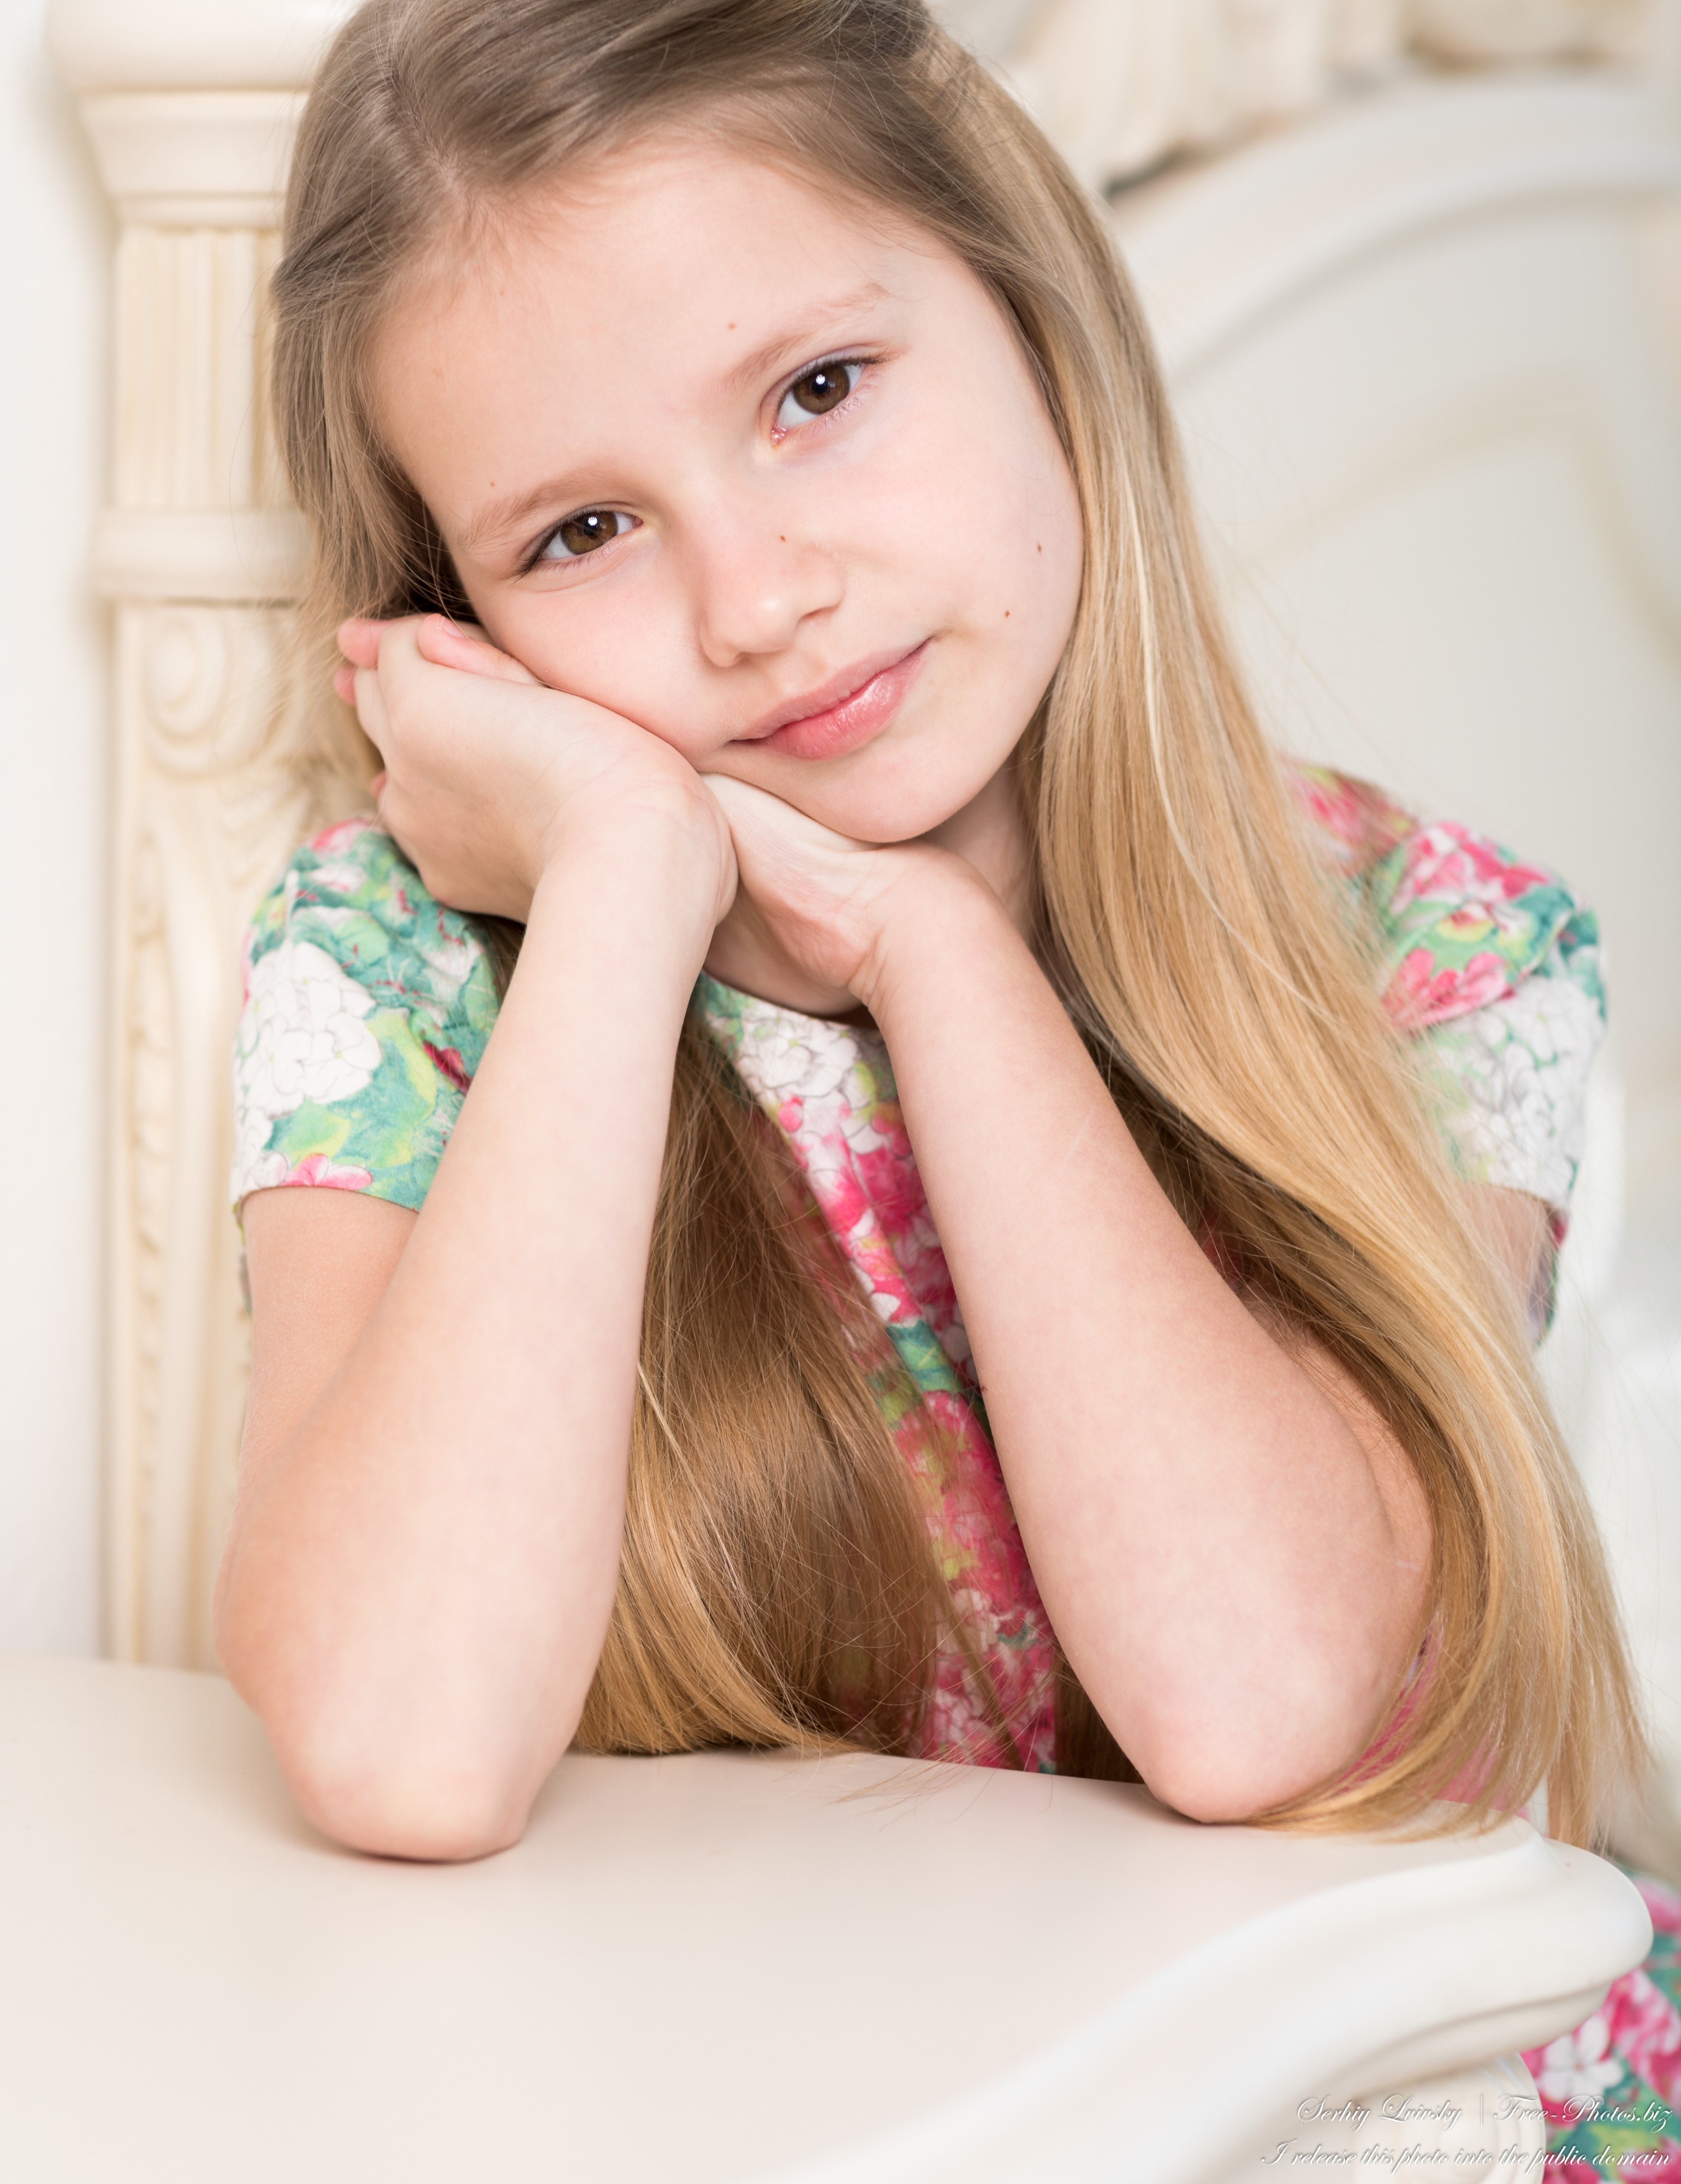 Ania - a 9-year-old girl with natural fair hair photographed in April 2023 by Serhiy Lvivsky, portrait 18 out of 20